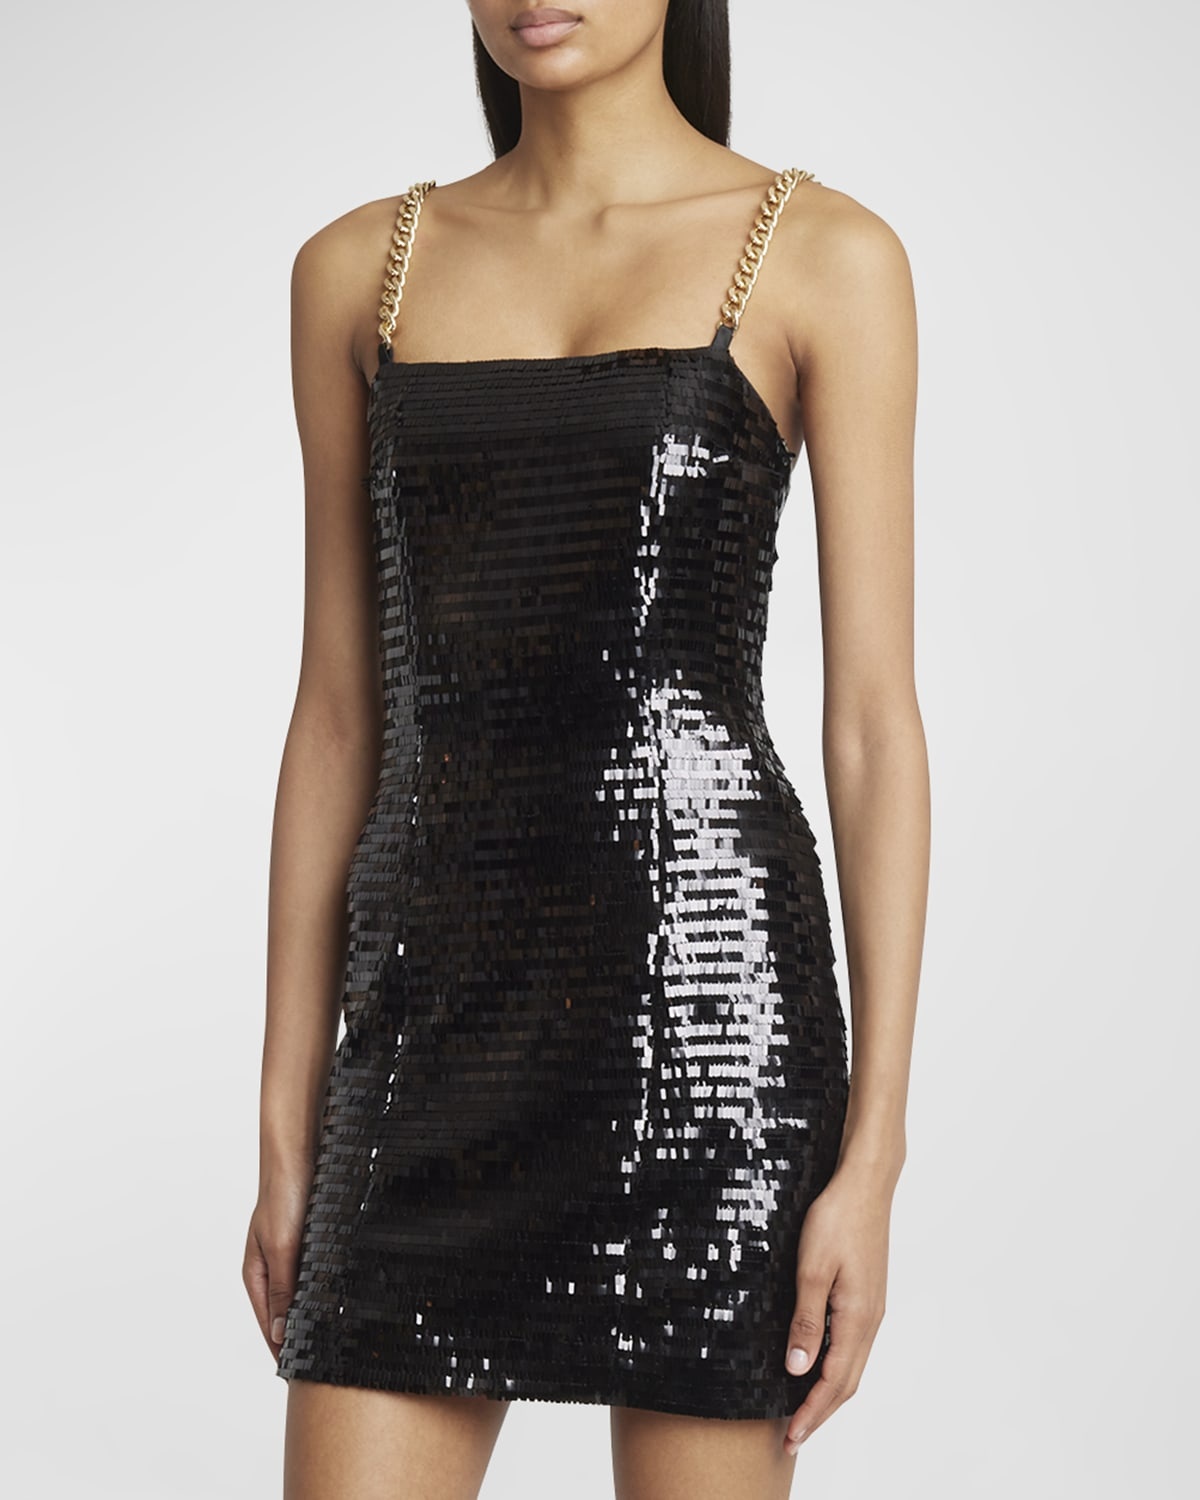 Sequin Mini Dress with Chain Strap Detail - 3